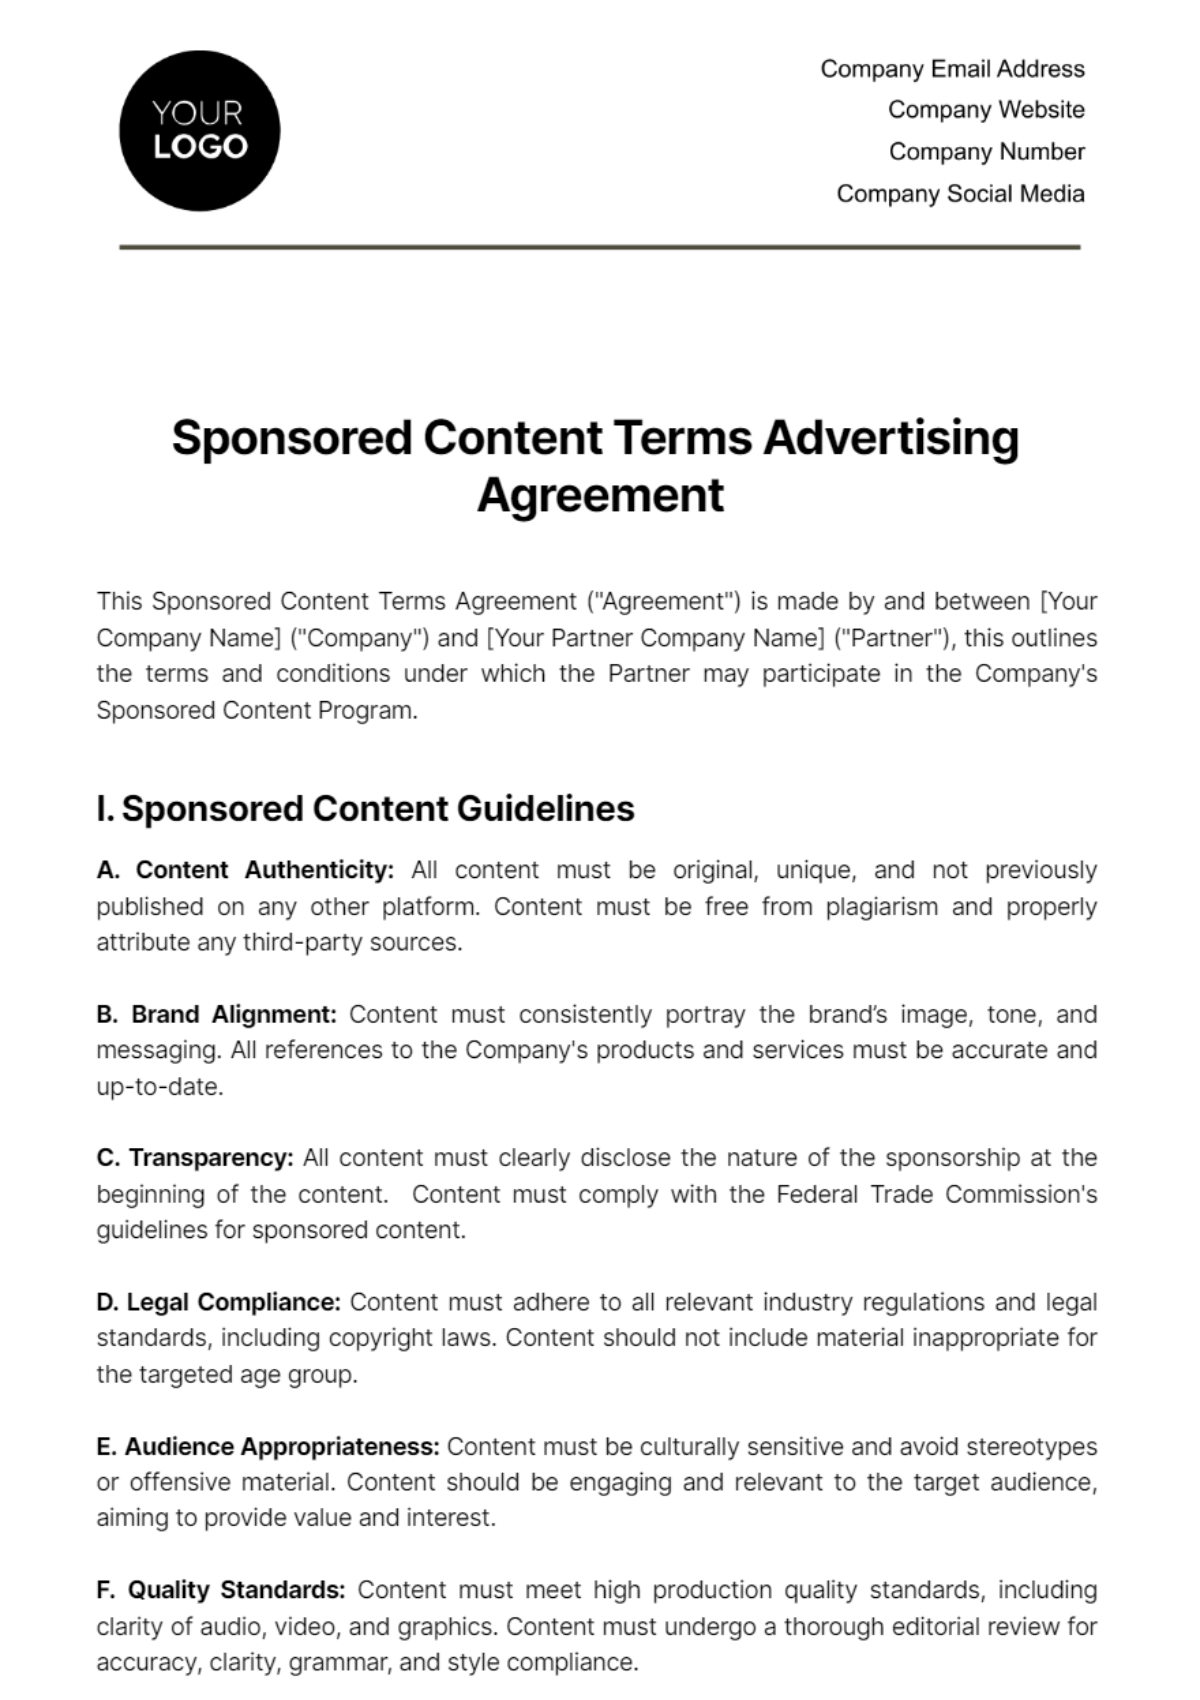 Sponsored Content Terms Advertising Agreement Template